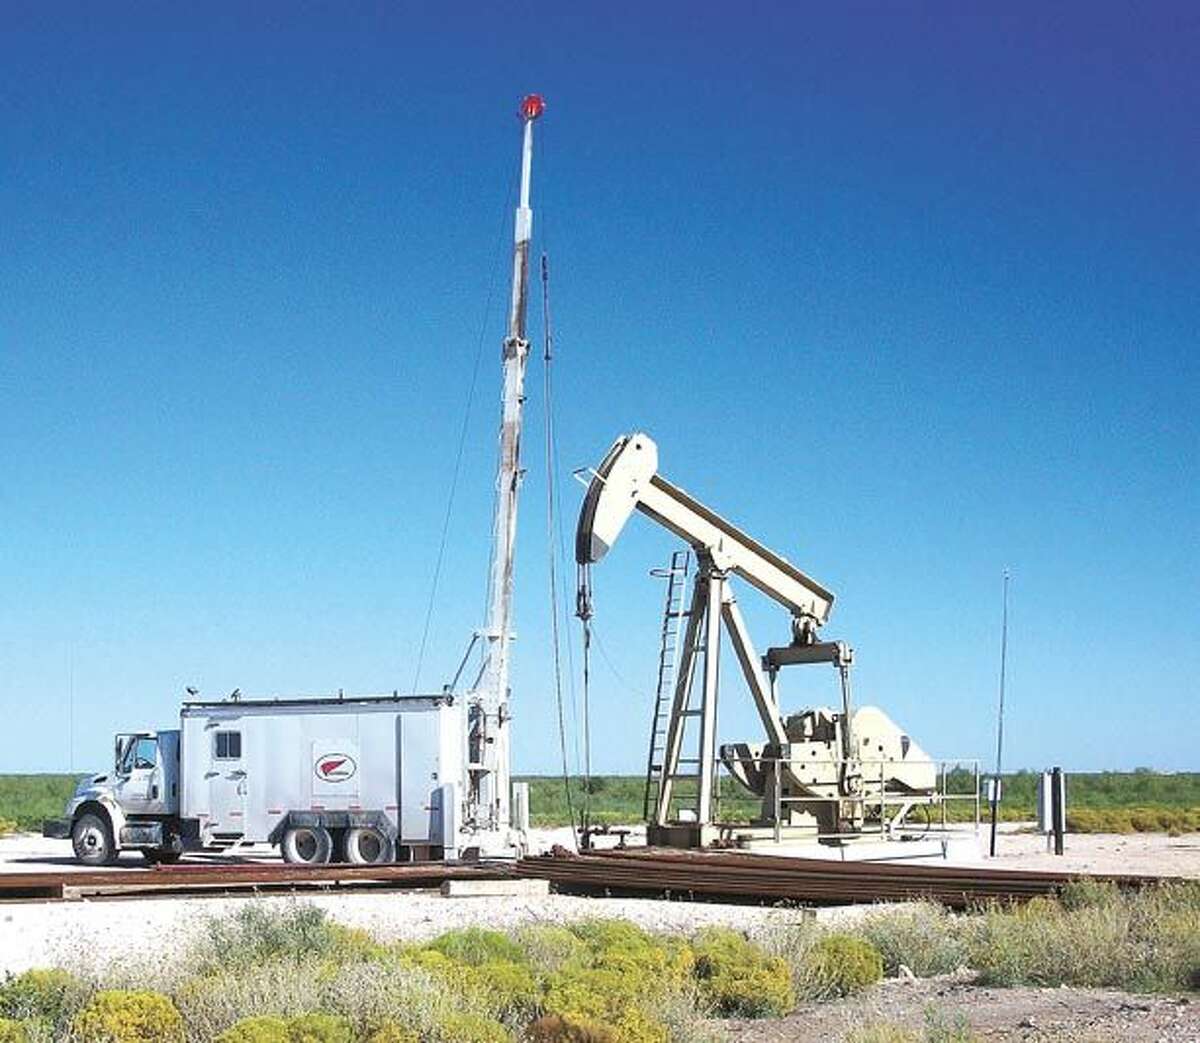 When is a producing well worse than a dry hole? When you’re spending more hauling water than you make on the oil. Good downhole data, with proper interpretation, can fix that. Call Cardinal Surveys this week for an FYI session that can help you plug the water and turn on the oil. Call them at (432) 580-8061.